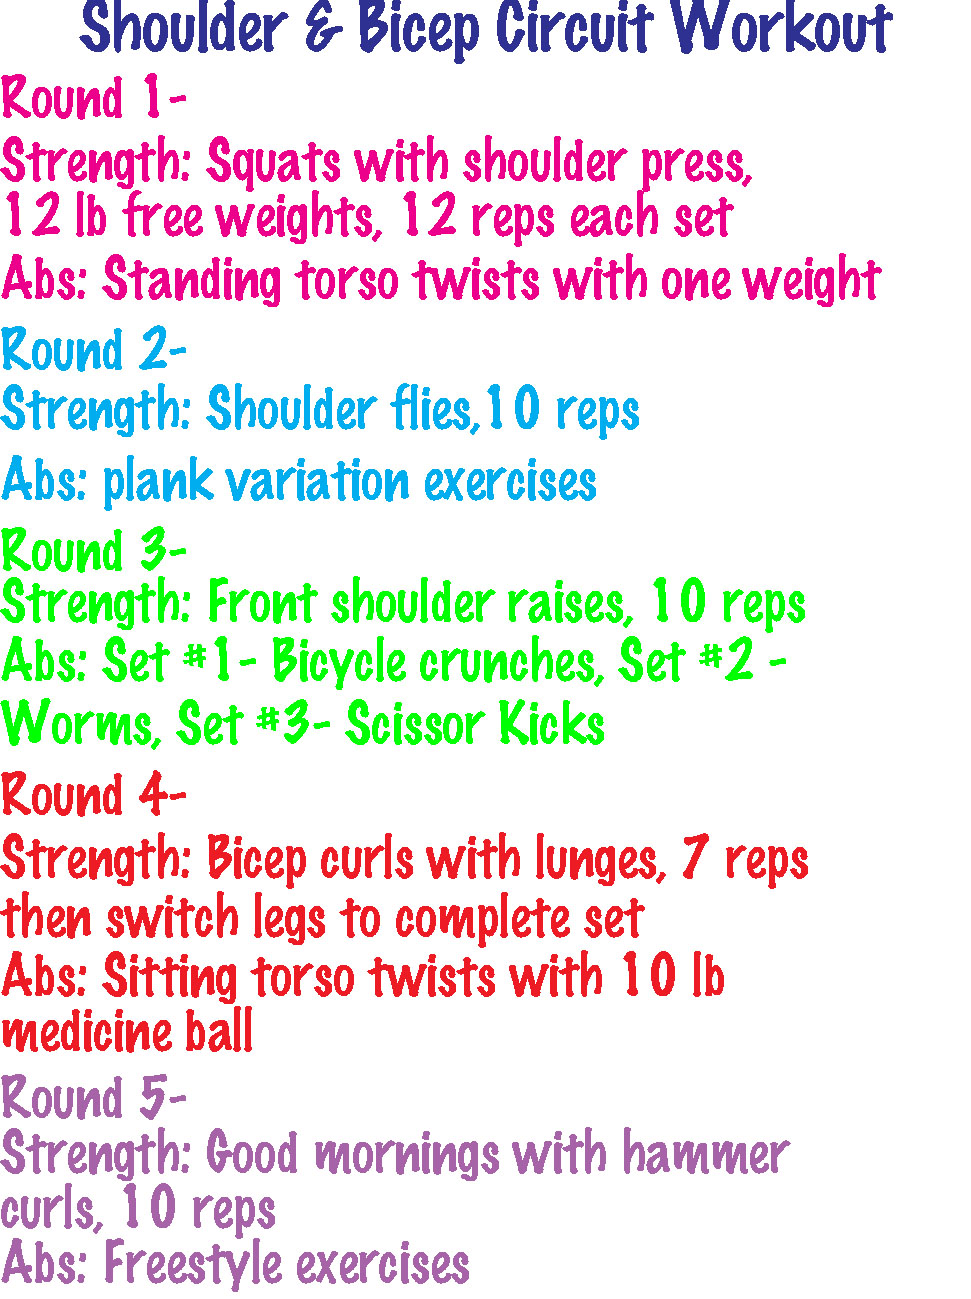 A Few of This Week’s Workouts